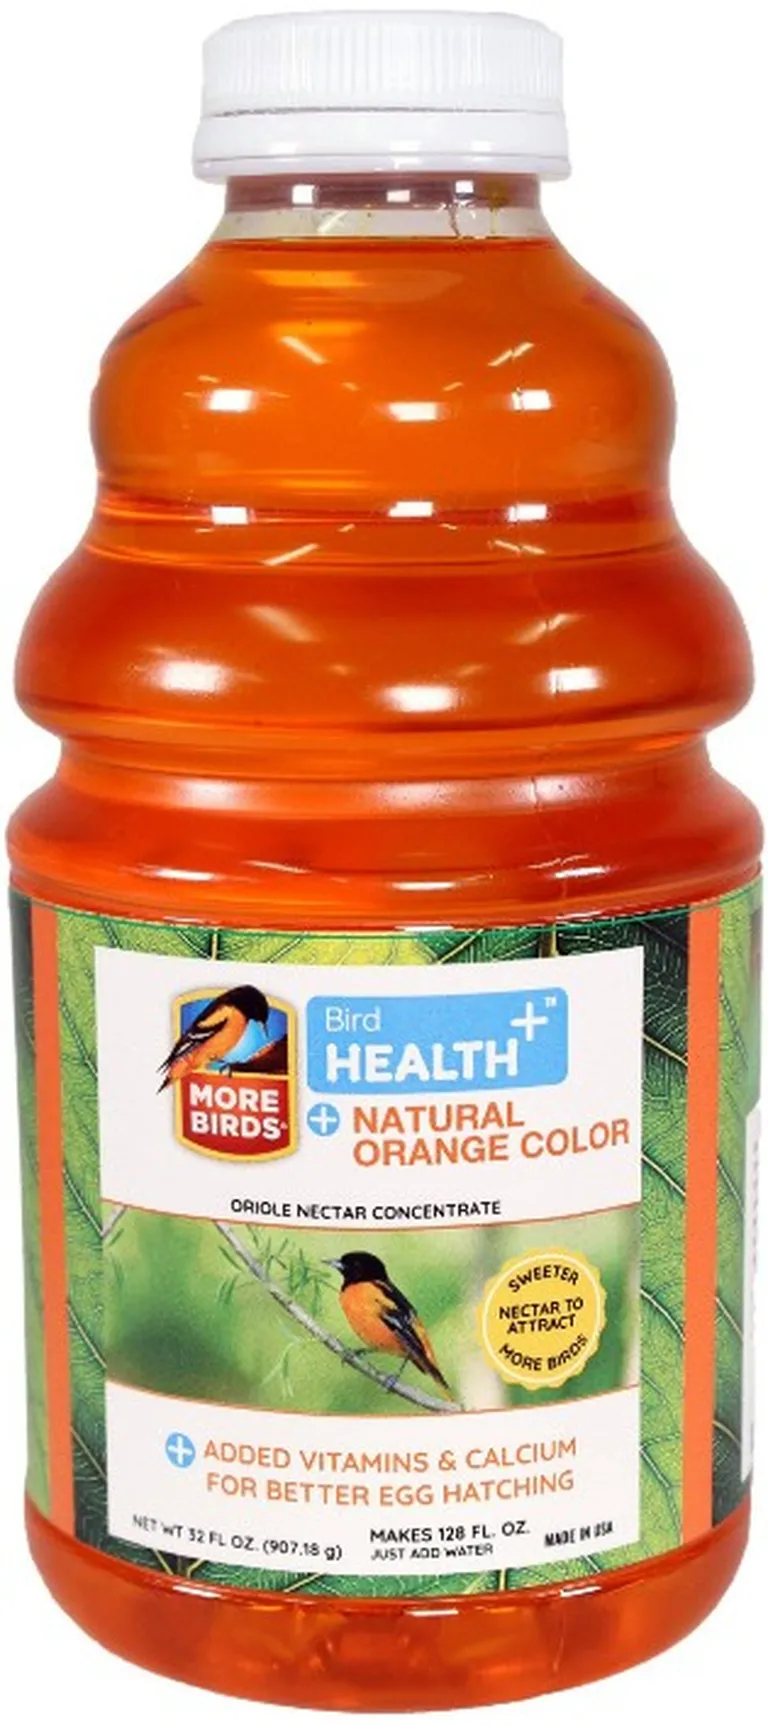 More Birds Health Plus Natural Orange Oriole Nectar Concentrate Photo 1